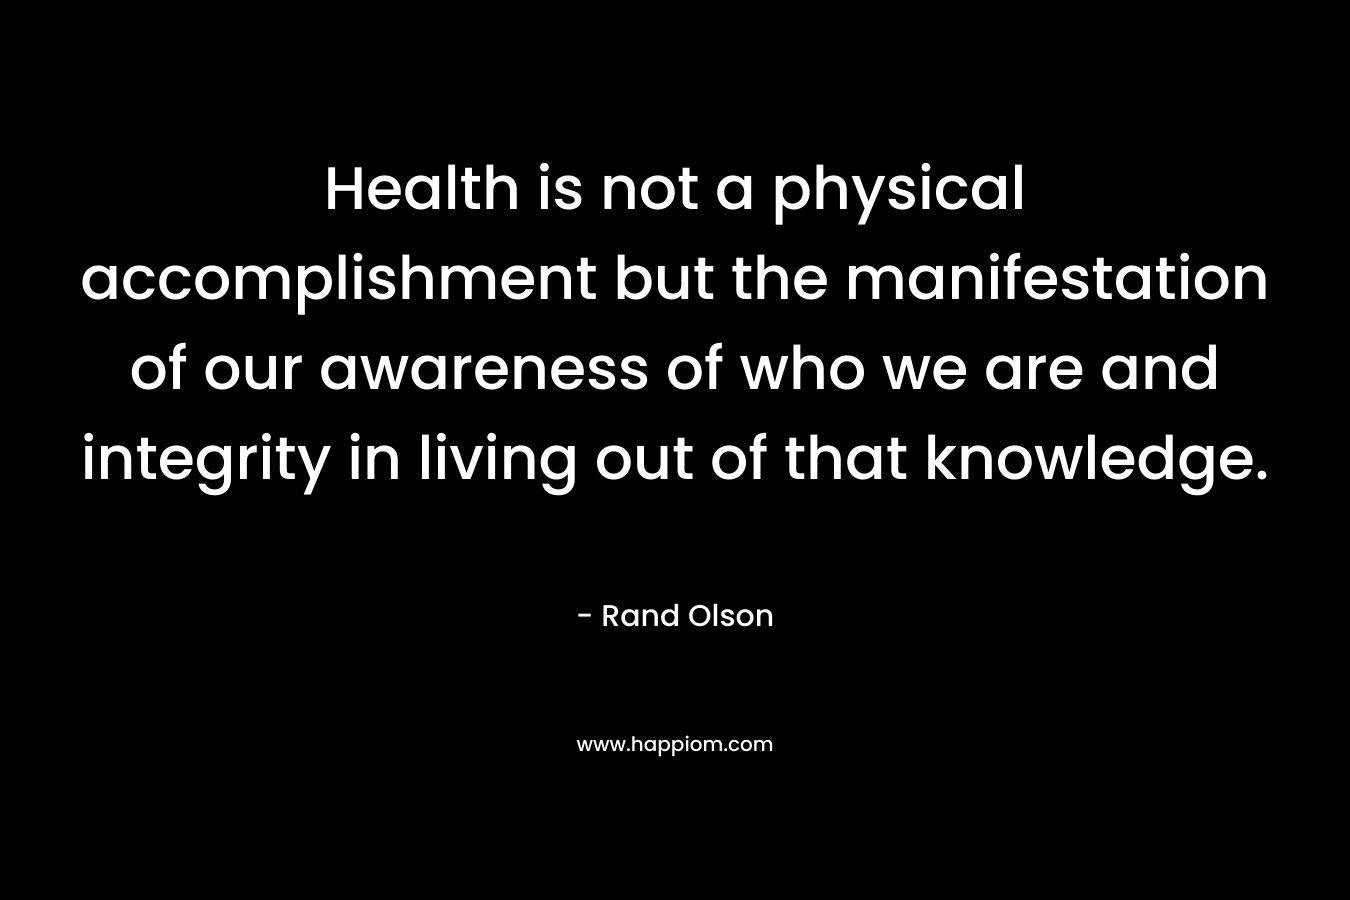 Health is not a physical accomplishment but the manifestation of our awareness of who we are and integrity in living out of that knowledge. – Rand Olson